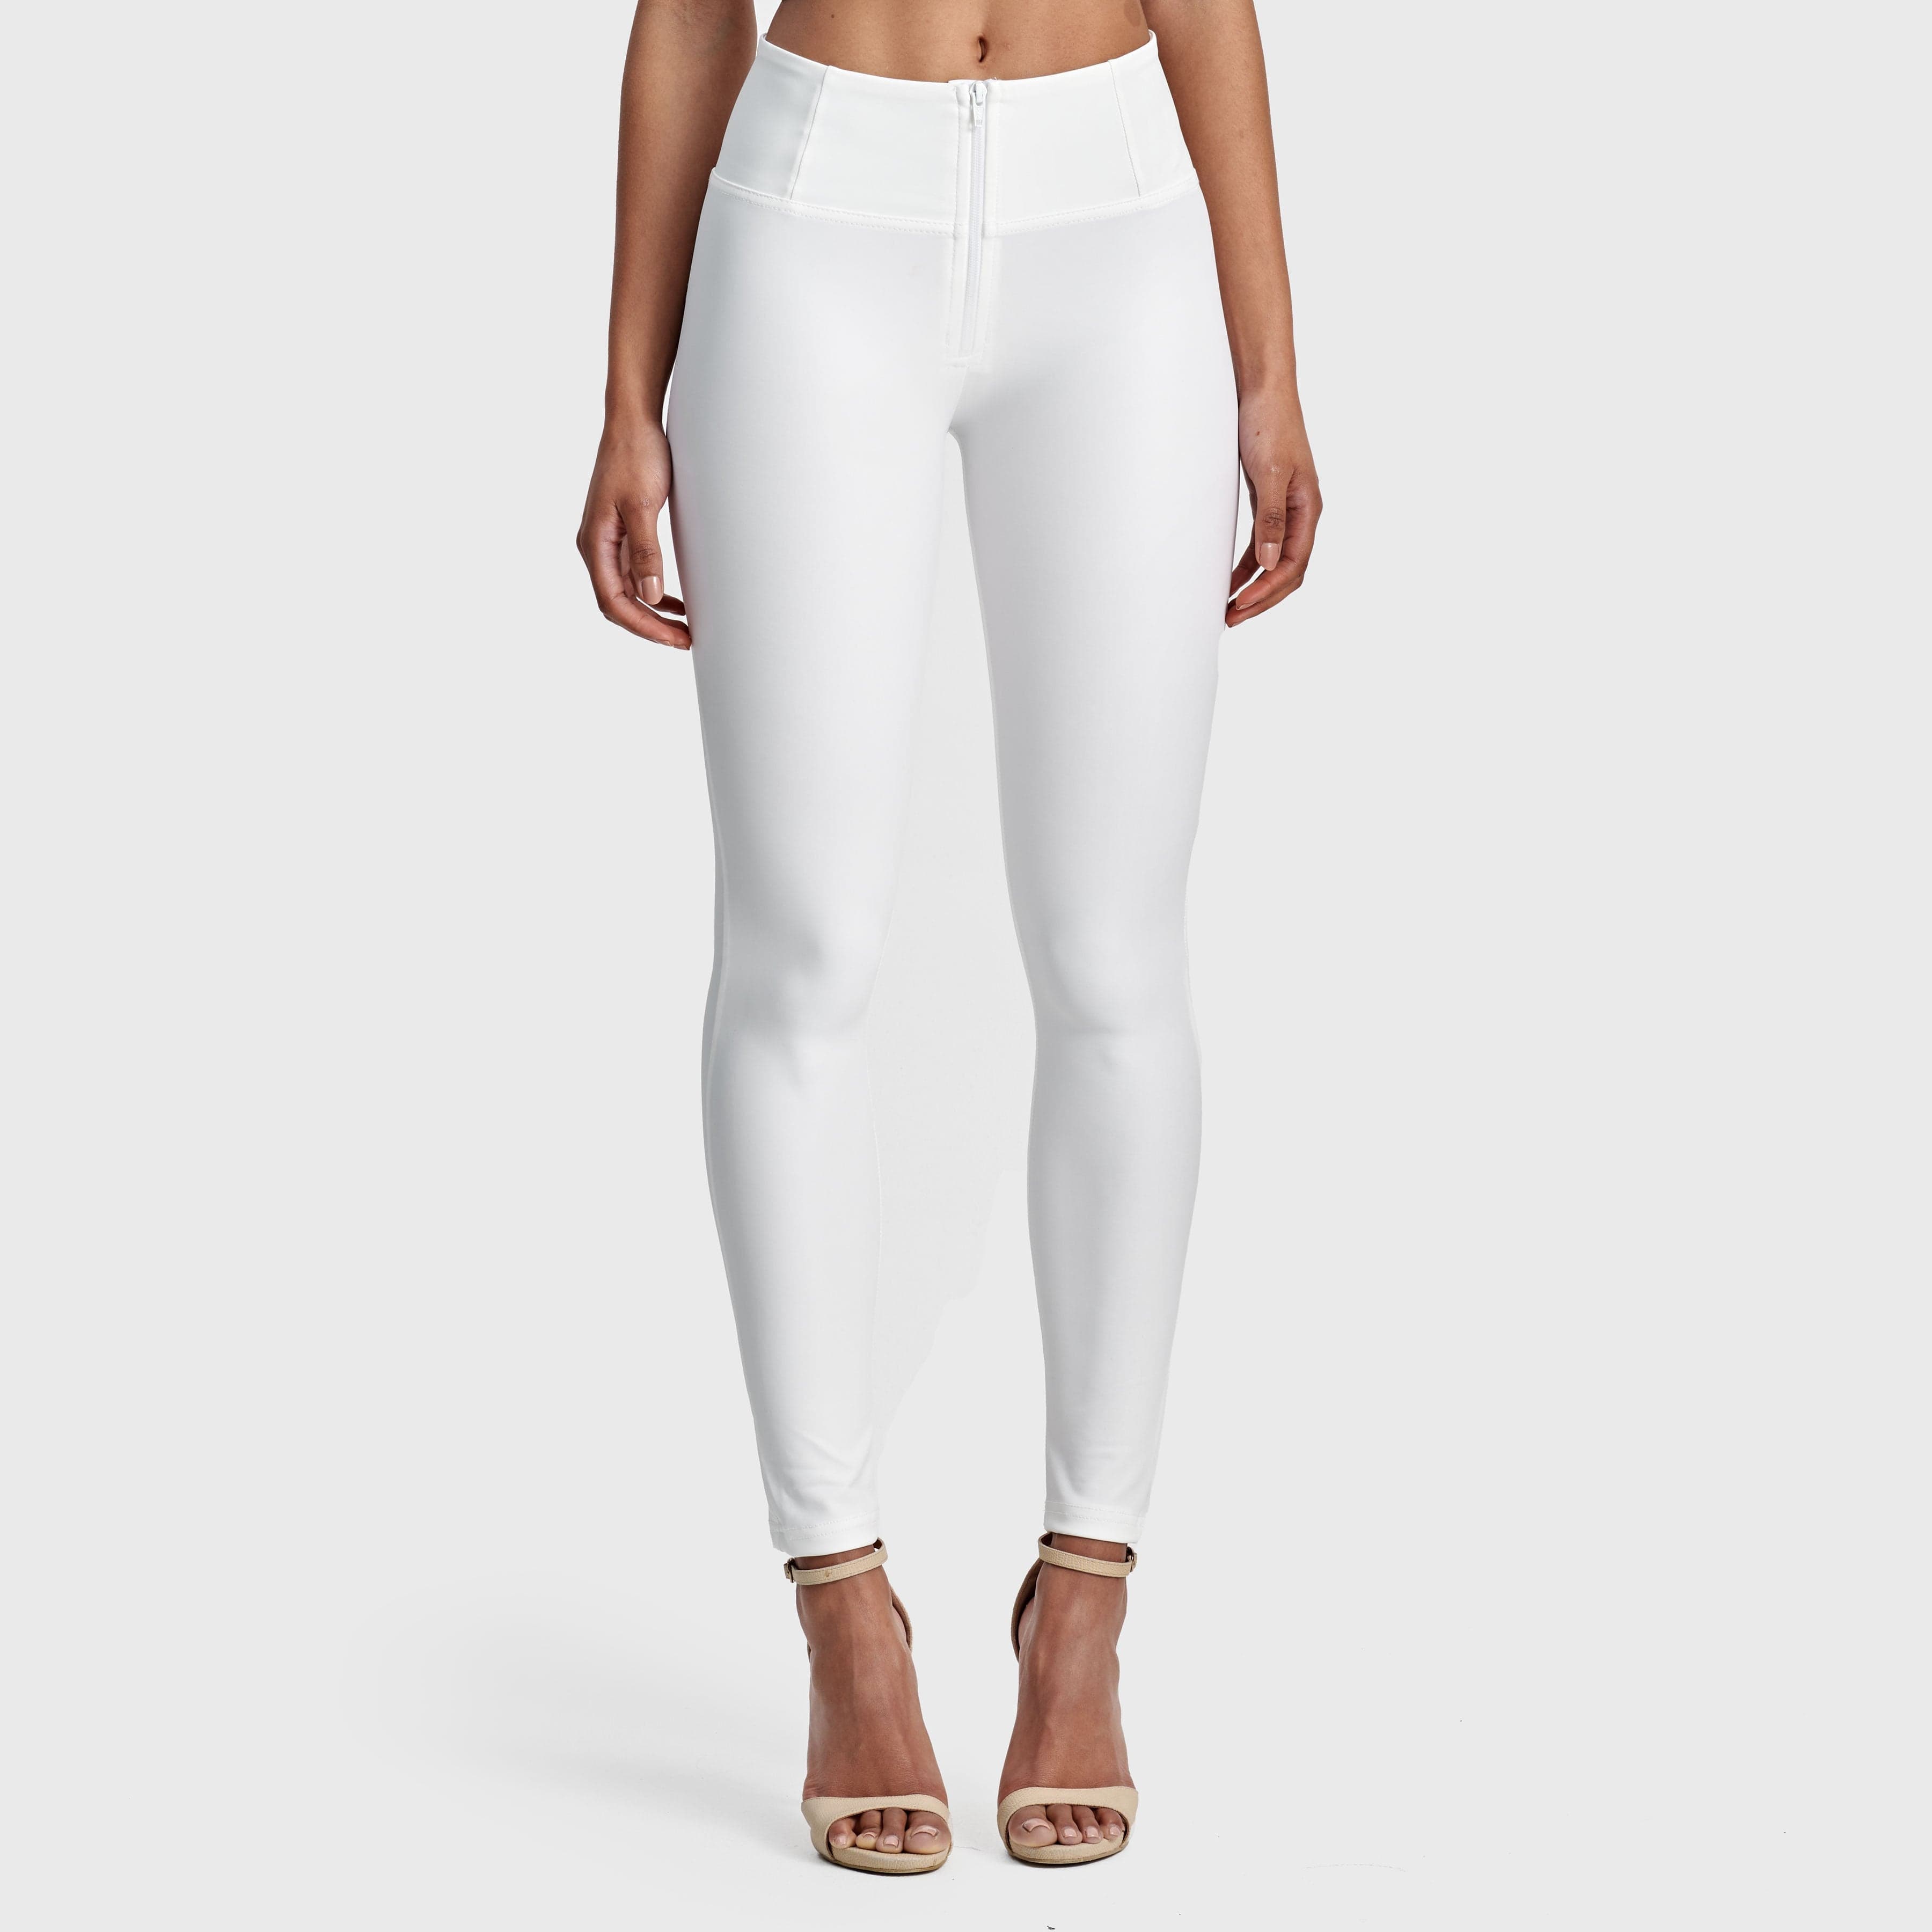 WR.UP® Faux Leather - High Waisted - Full Length - White 3